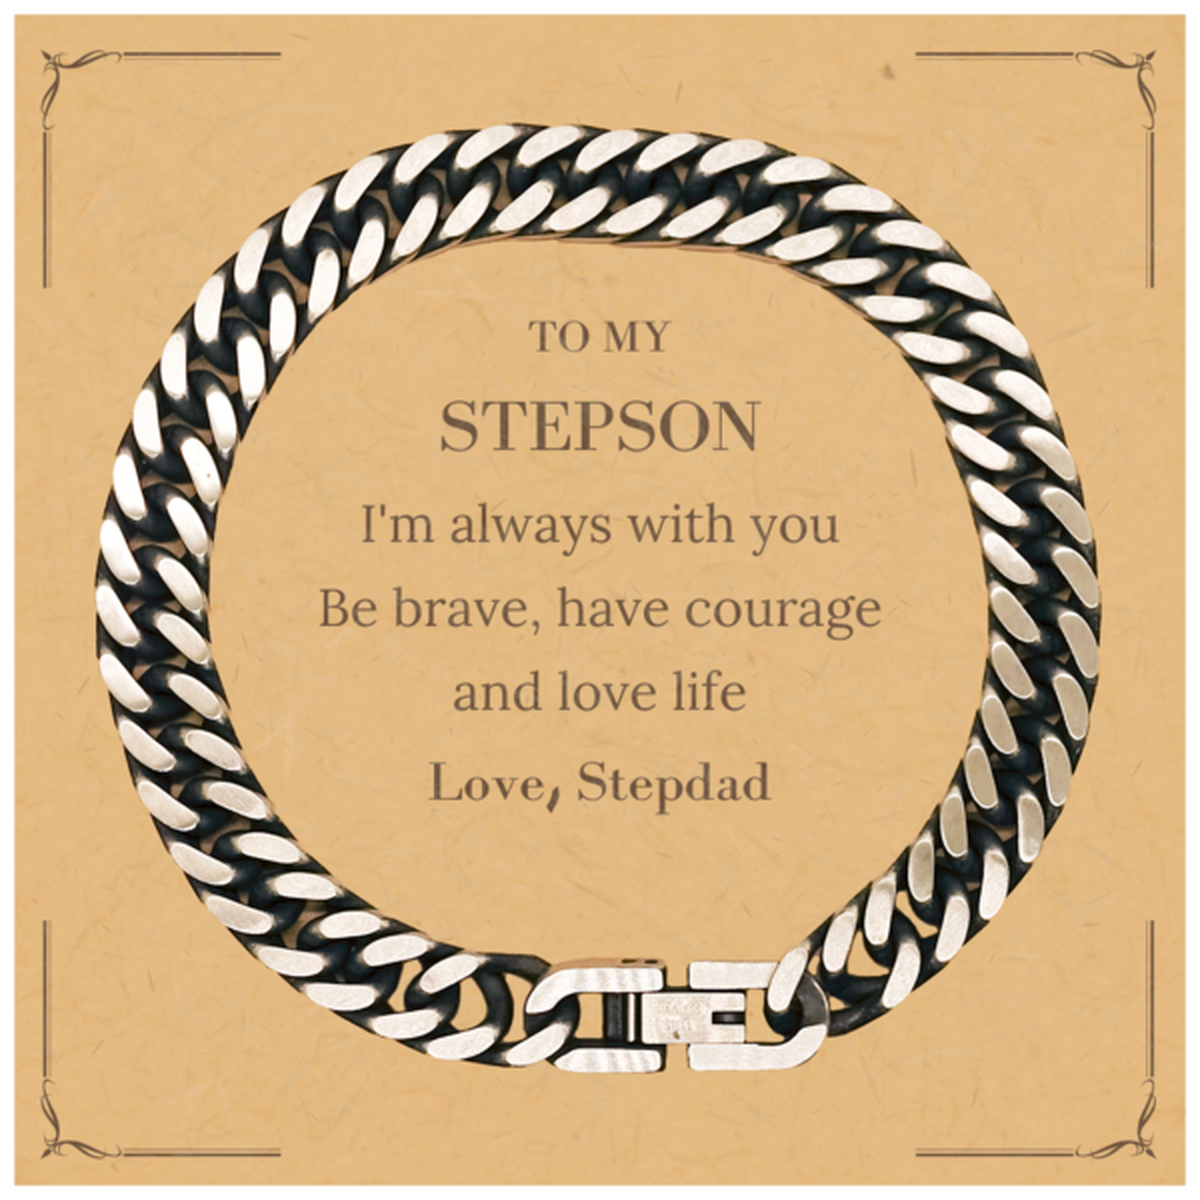 To My Stepson Gifts from Stepdad, Unique Cuban Link Chain Bracelet Inspirational Christmas Birthday Graduation Gifts for Stepson I'm always with you. Be brave, have courage and love life. Love, Stepdad